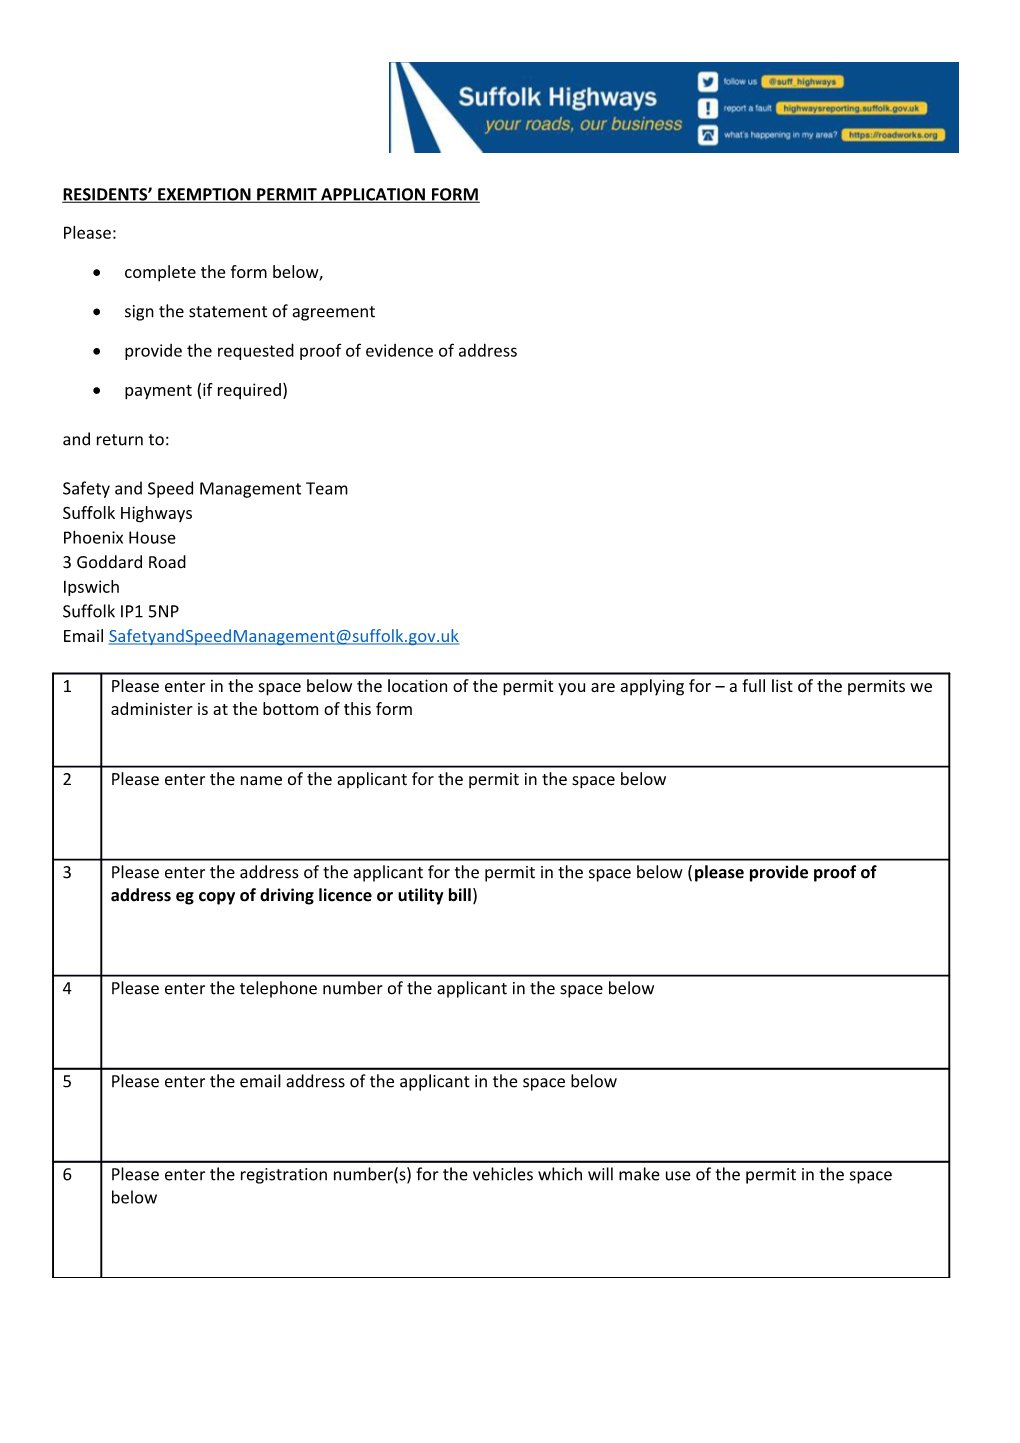 Residents Exemption Permit Application Form